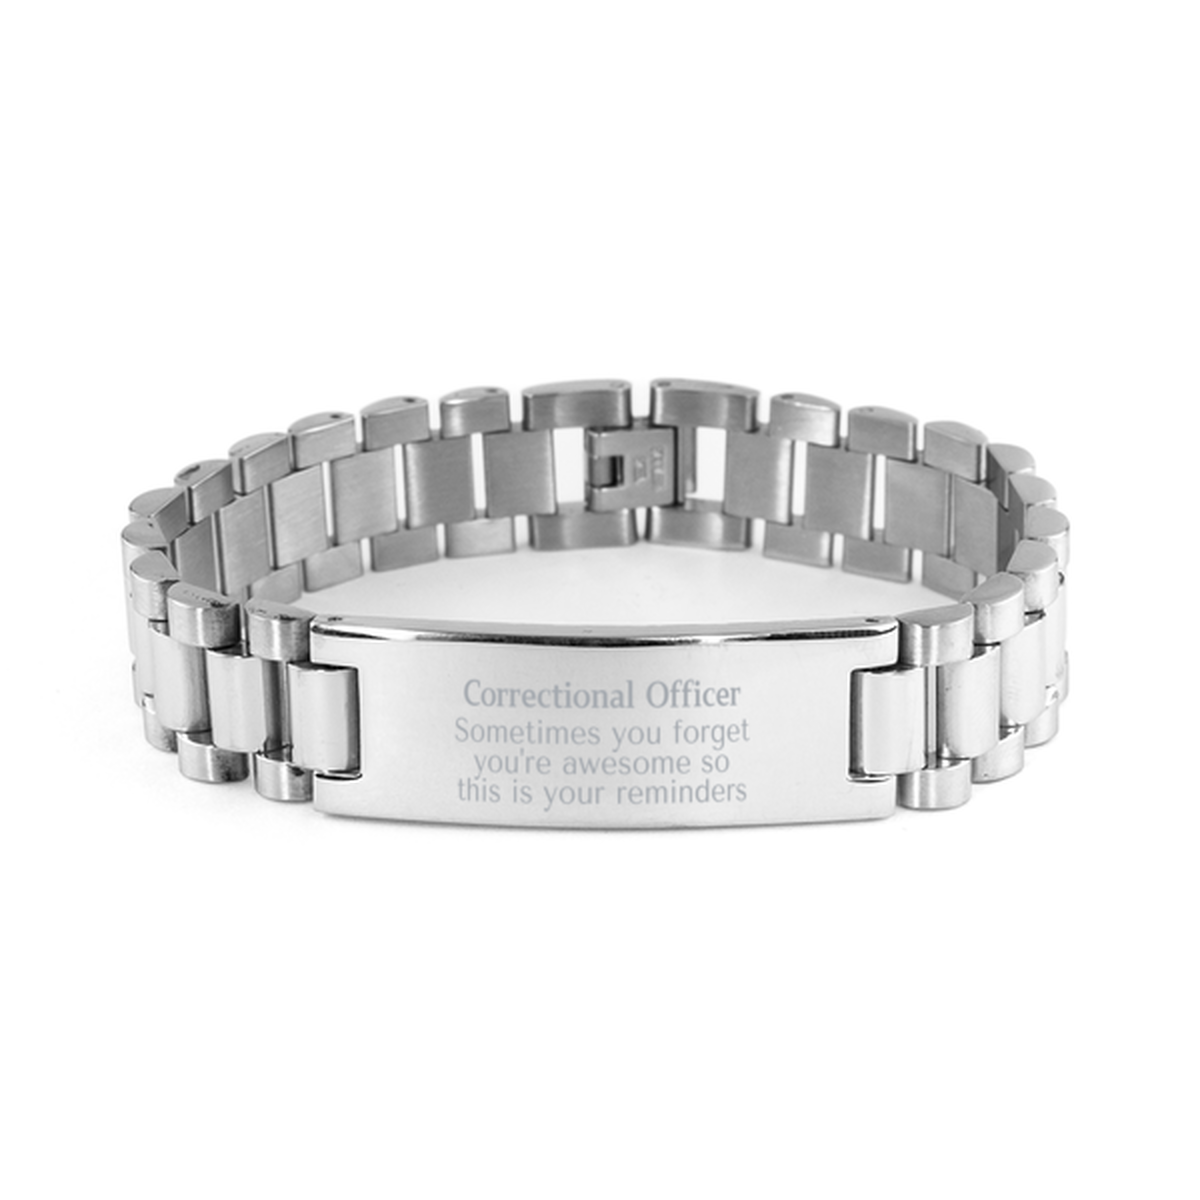 Sentimental Correctional Officer Ladder Stainless Steel Bracelet, Correctional Officer Sometimes you forget you're awesome so this is your reminders, Graduation Christmas Birthday Gifts for Correctional Officer, Men, Women, Coworkers